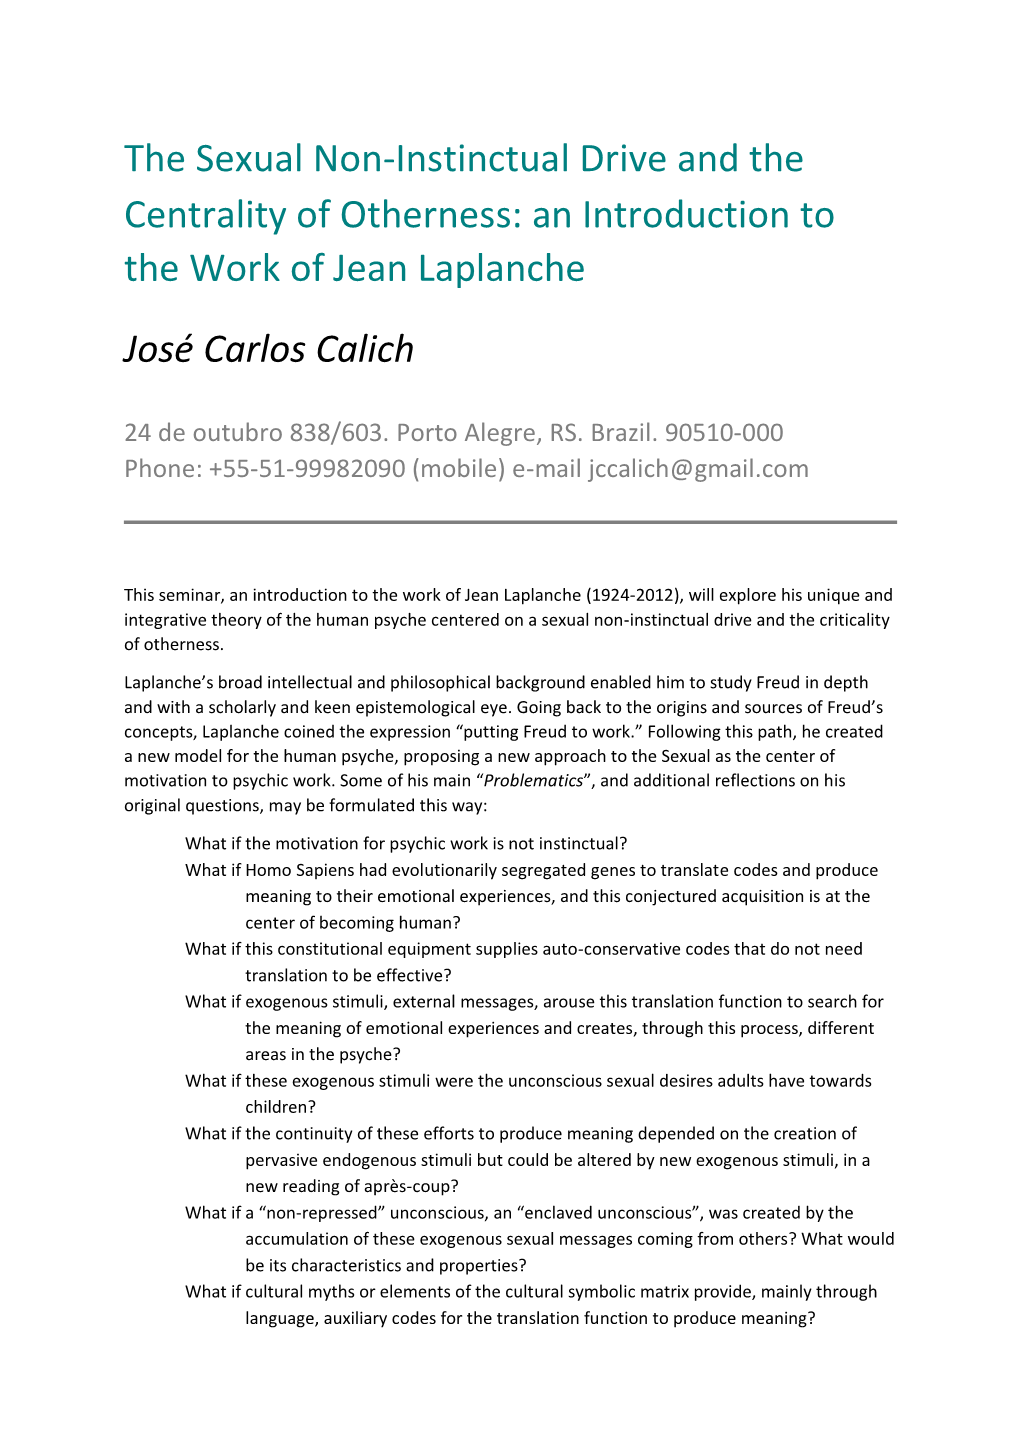 The Sexual Non-Instinctual Drive and the Centrality of Otherness: an Introduction to the Work of Jean Laplanche